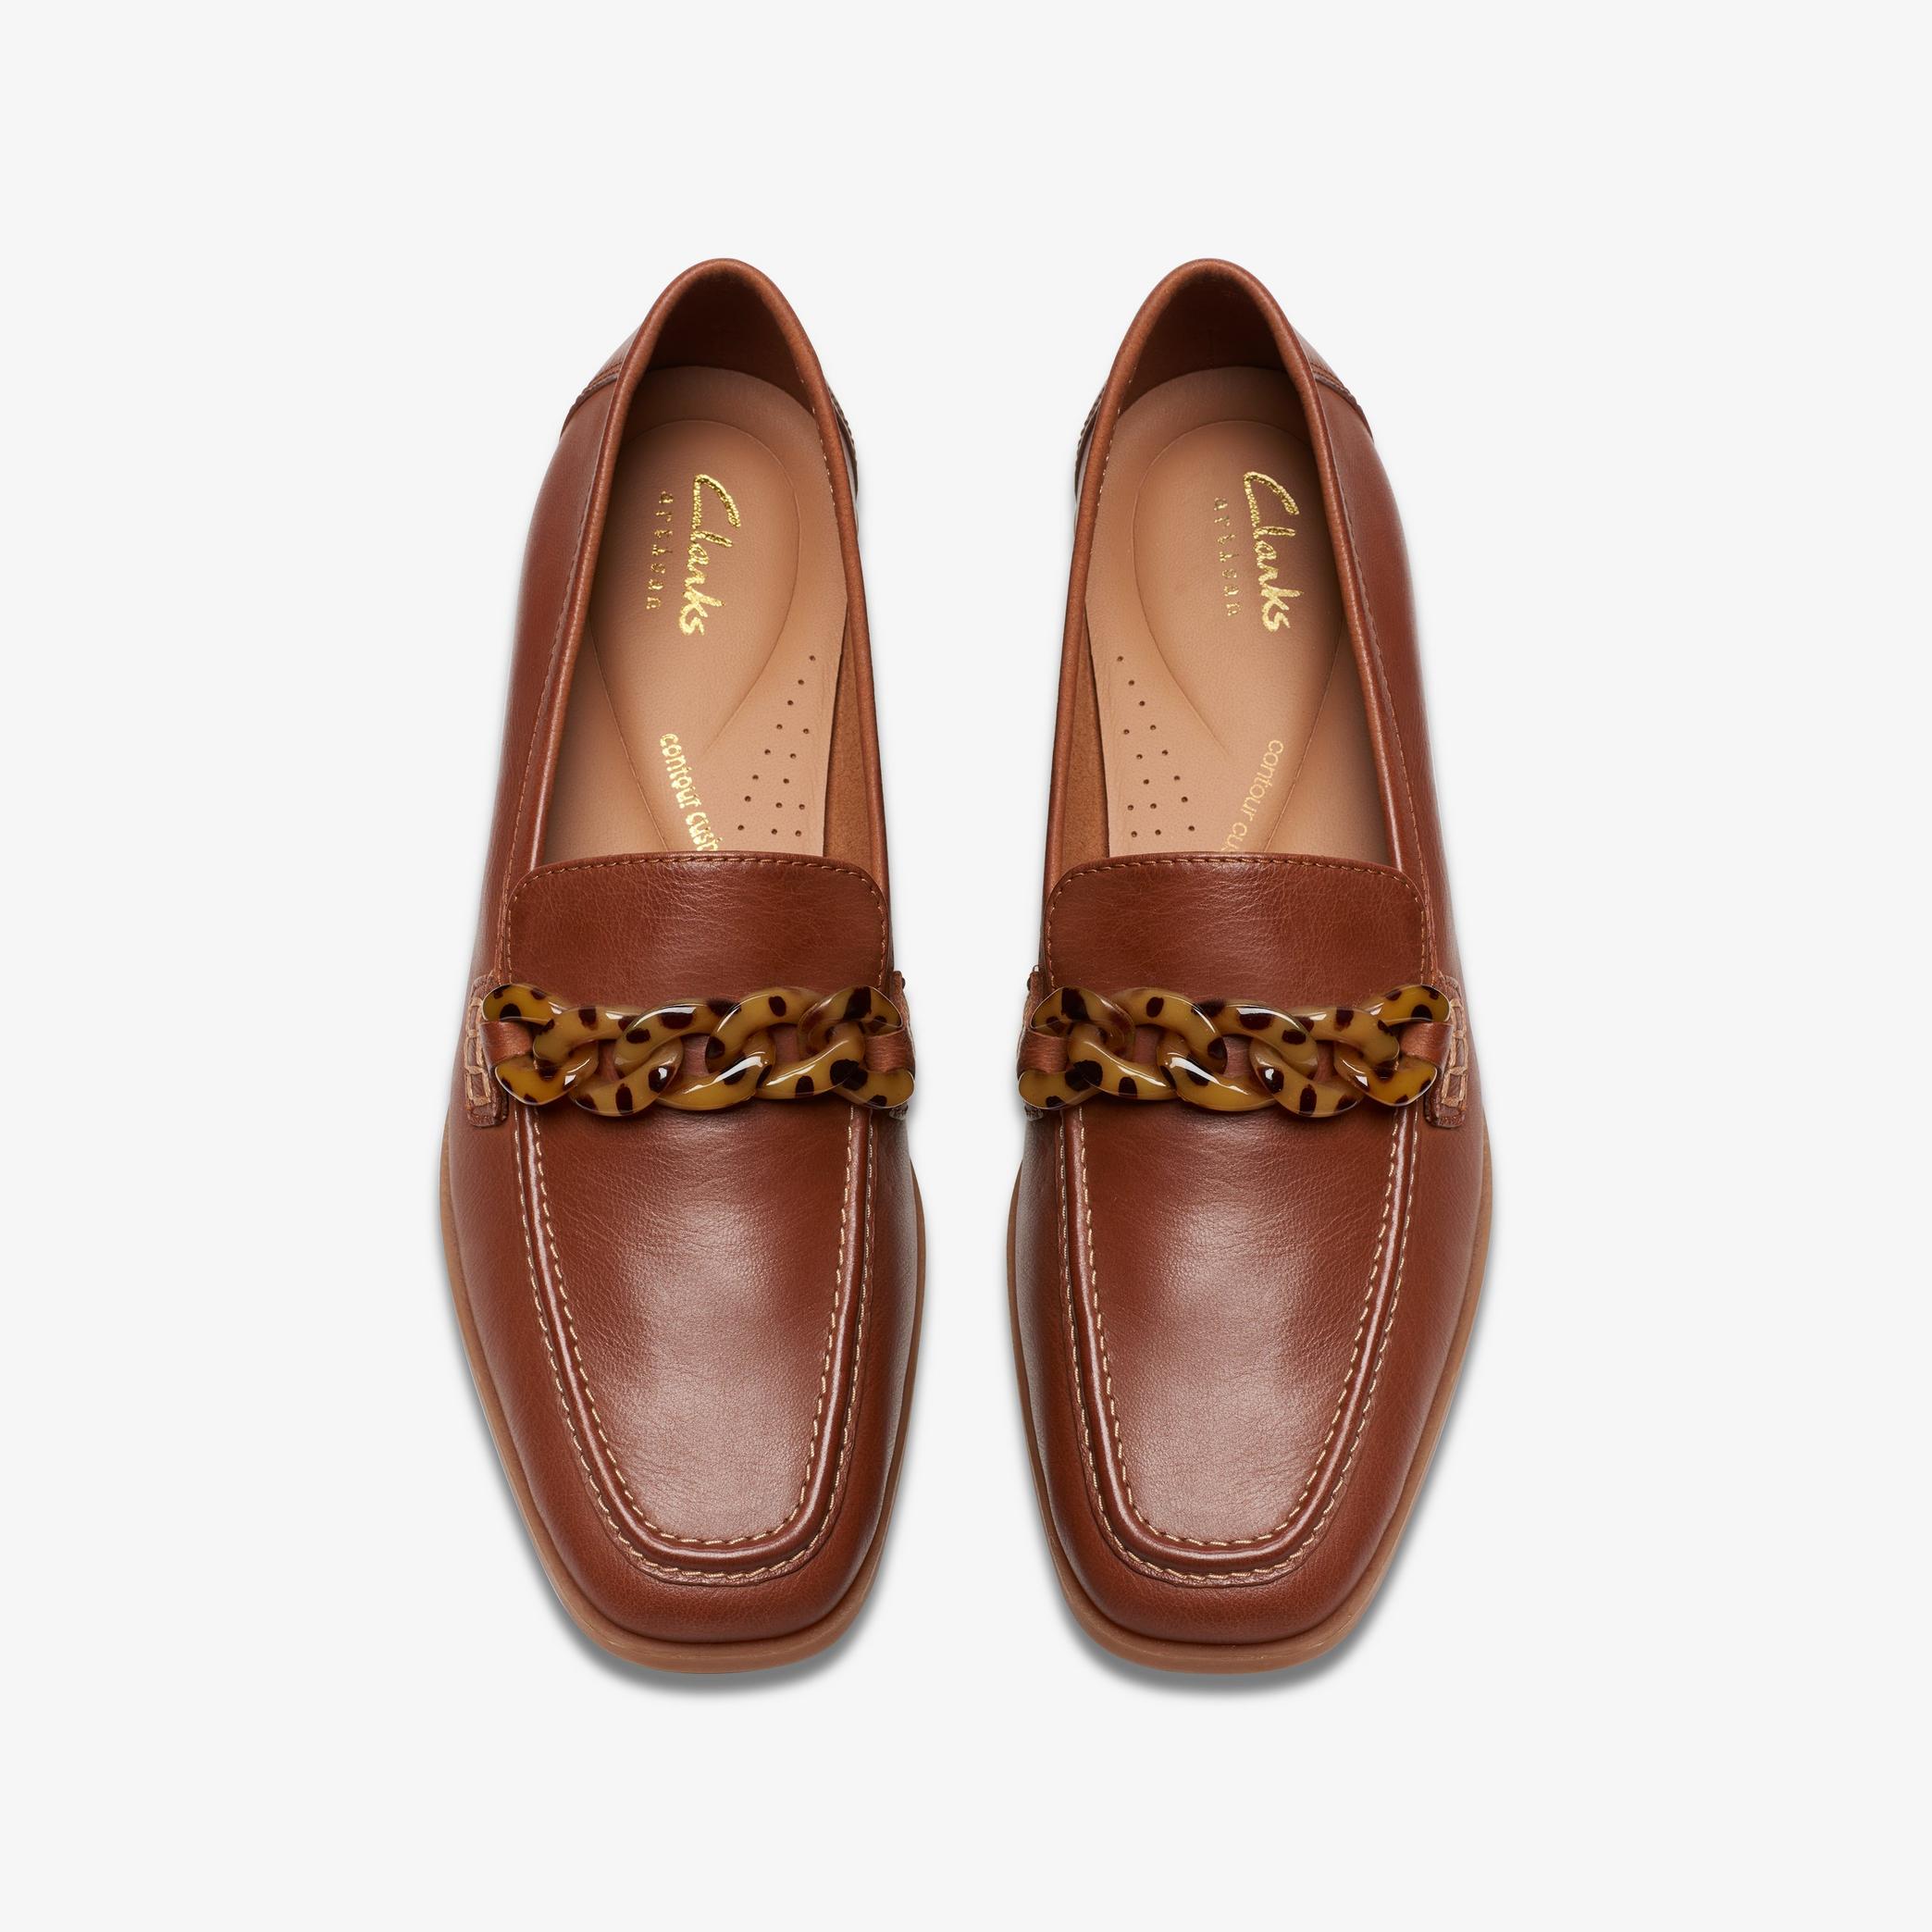 Sarafyna Iris Tan Leather Loafers, view 7 of 11